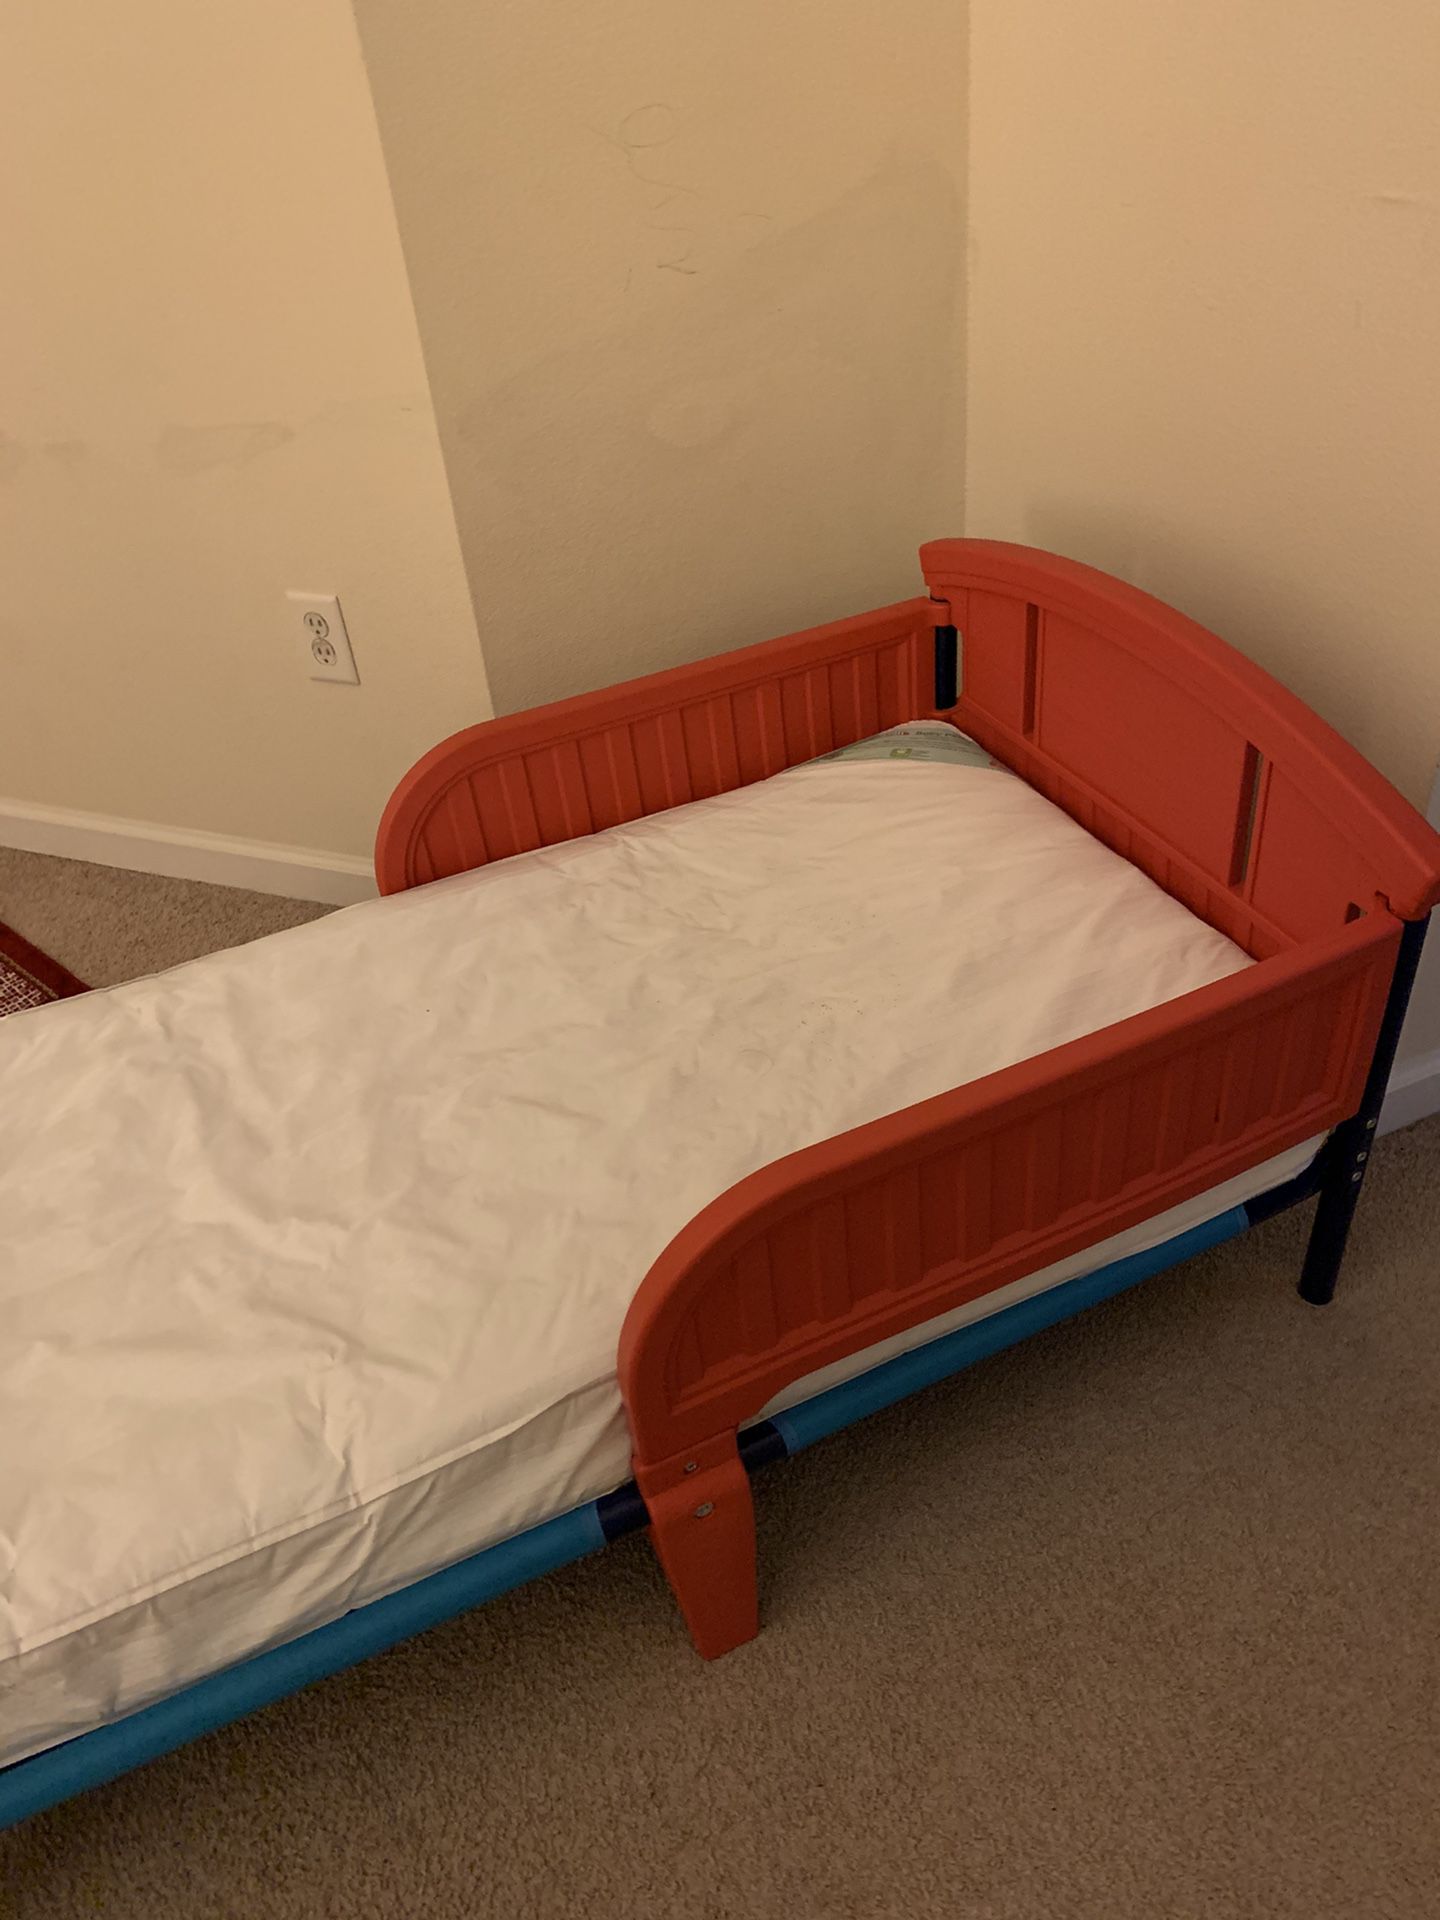 Kids bed and mattress and table